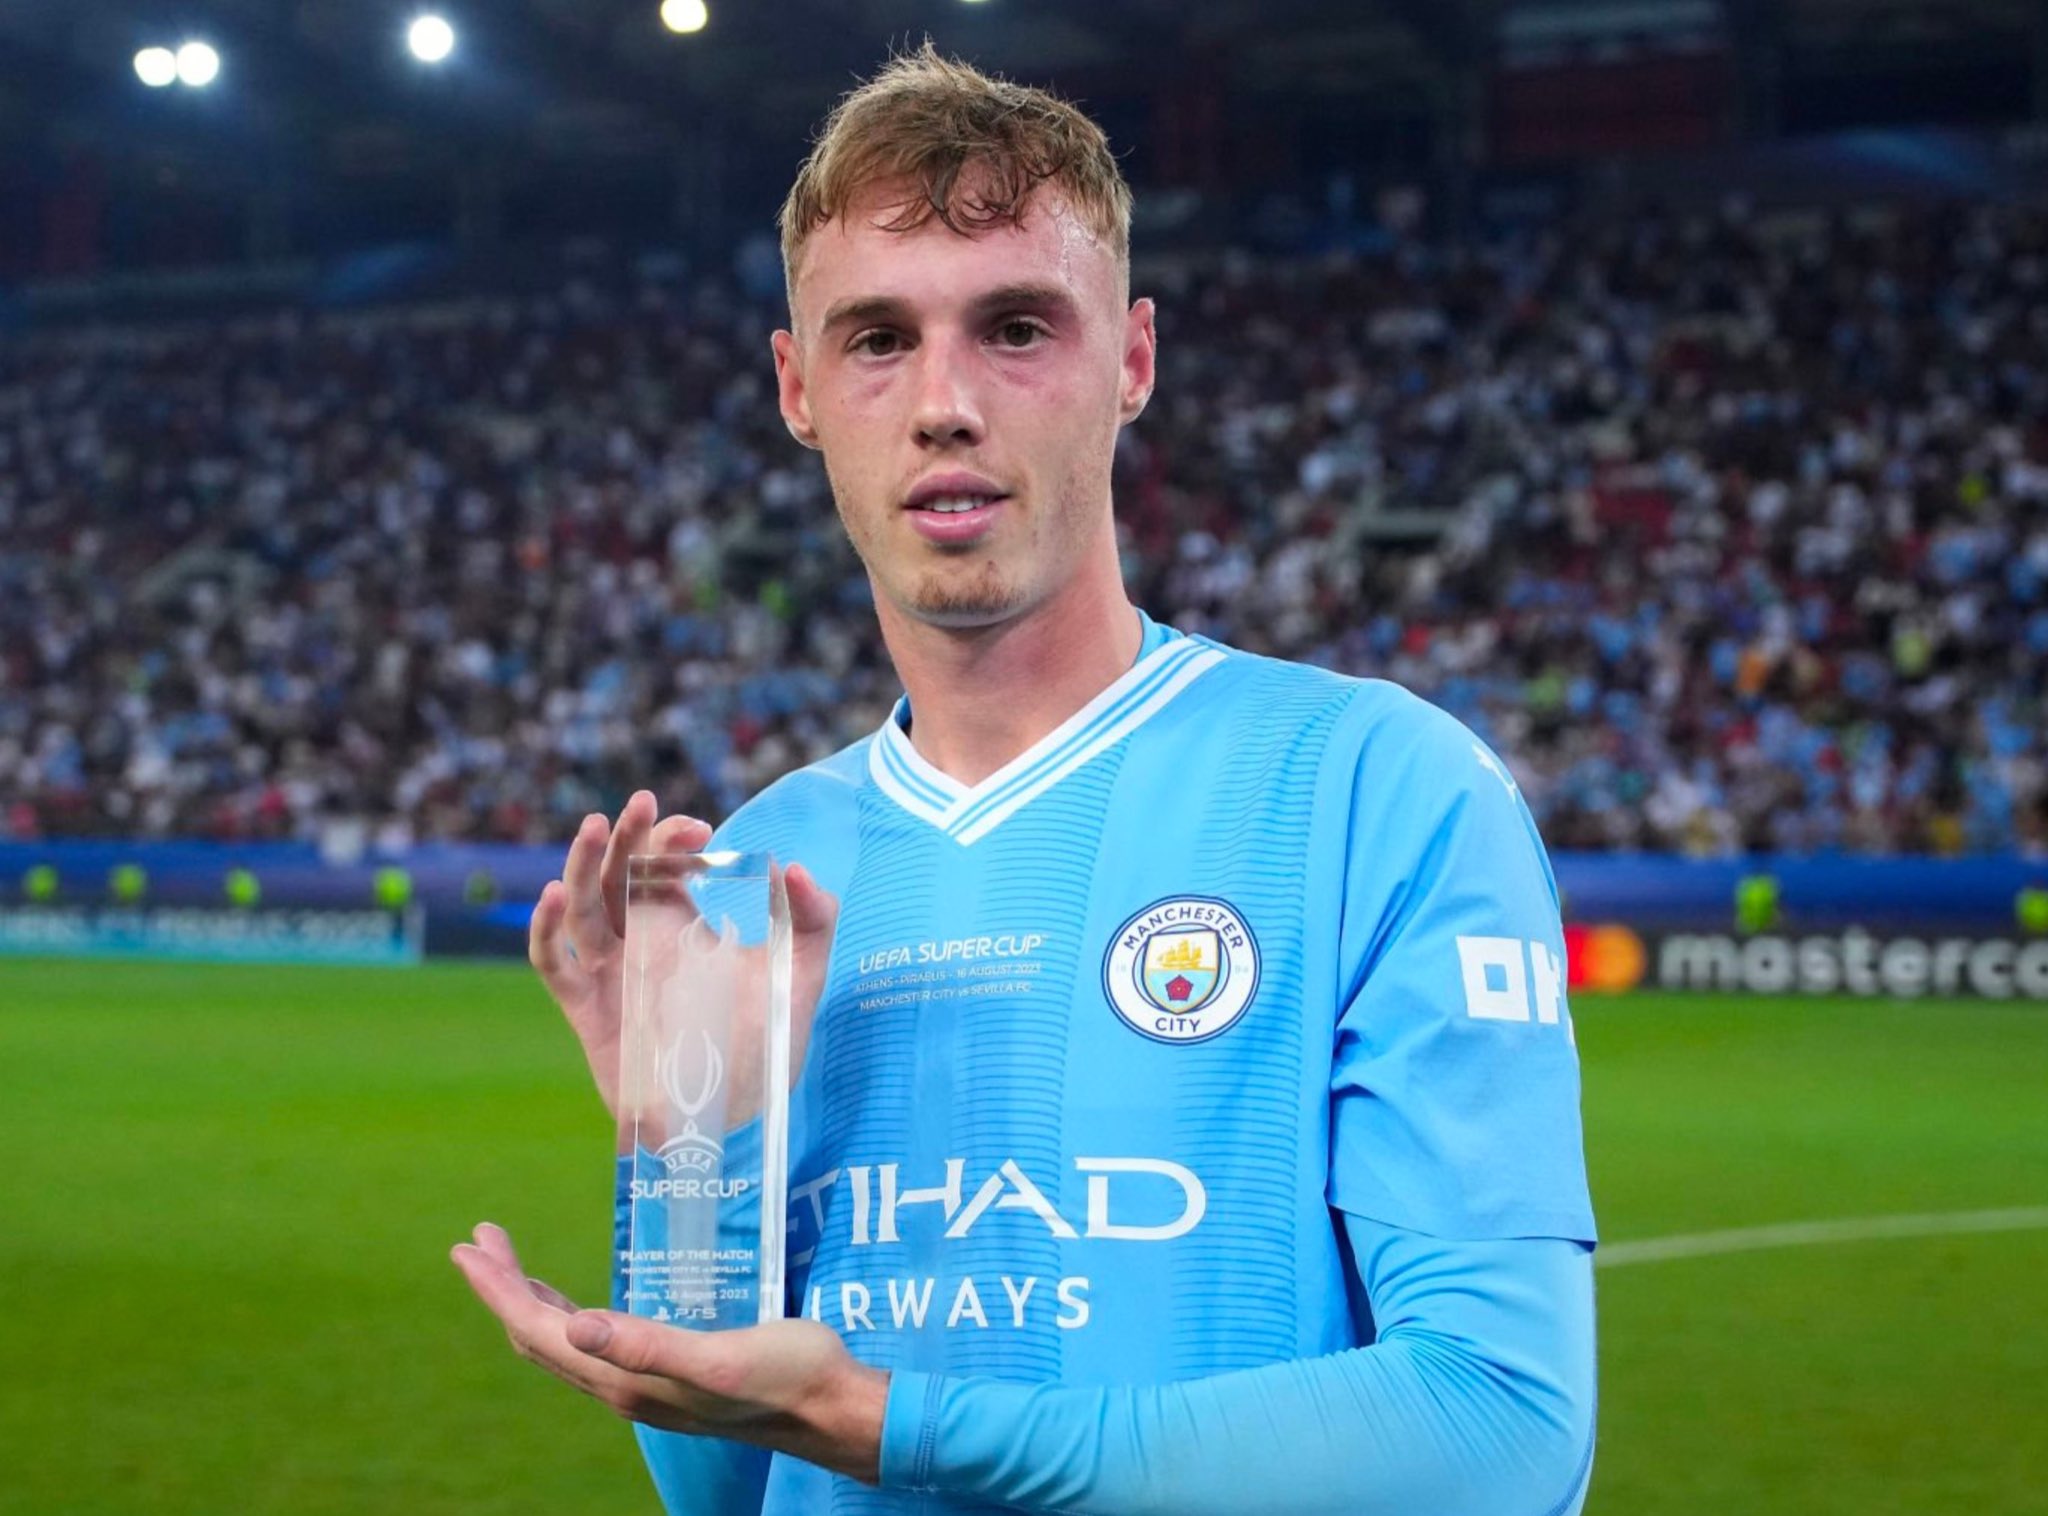 Pep Guardiola on Cole Palmer: “I don't think a loan is going to happen” - Bóng Đá